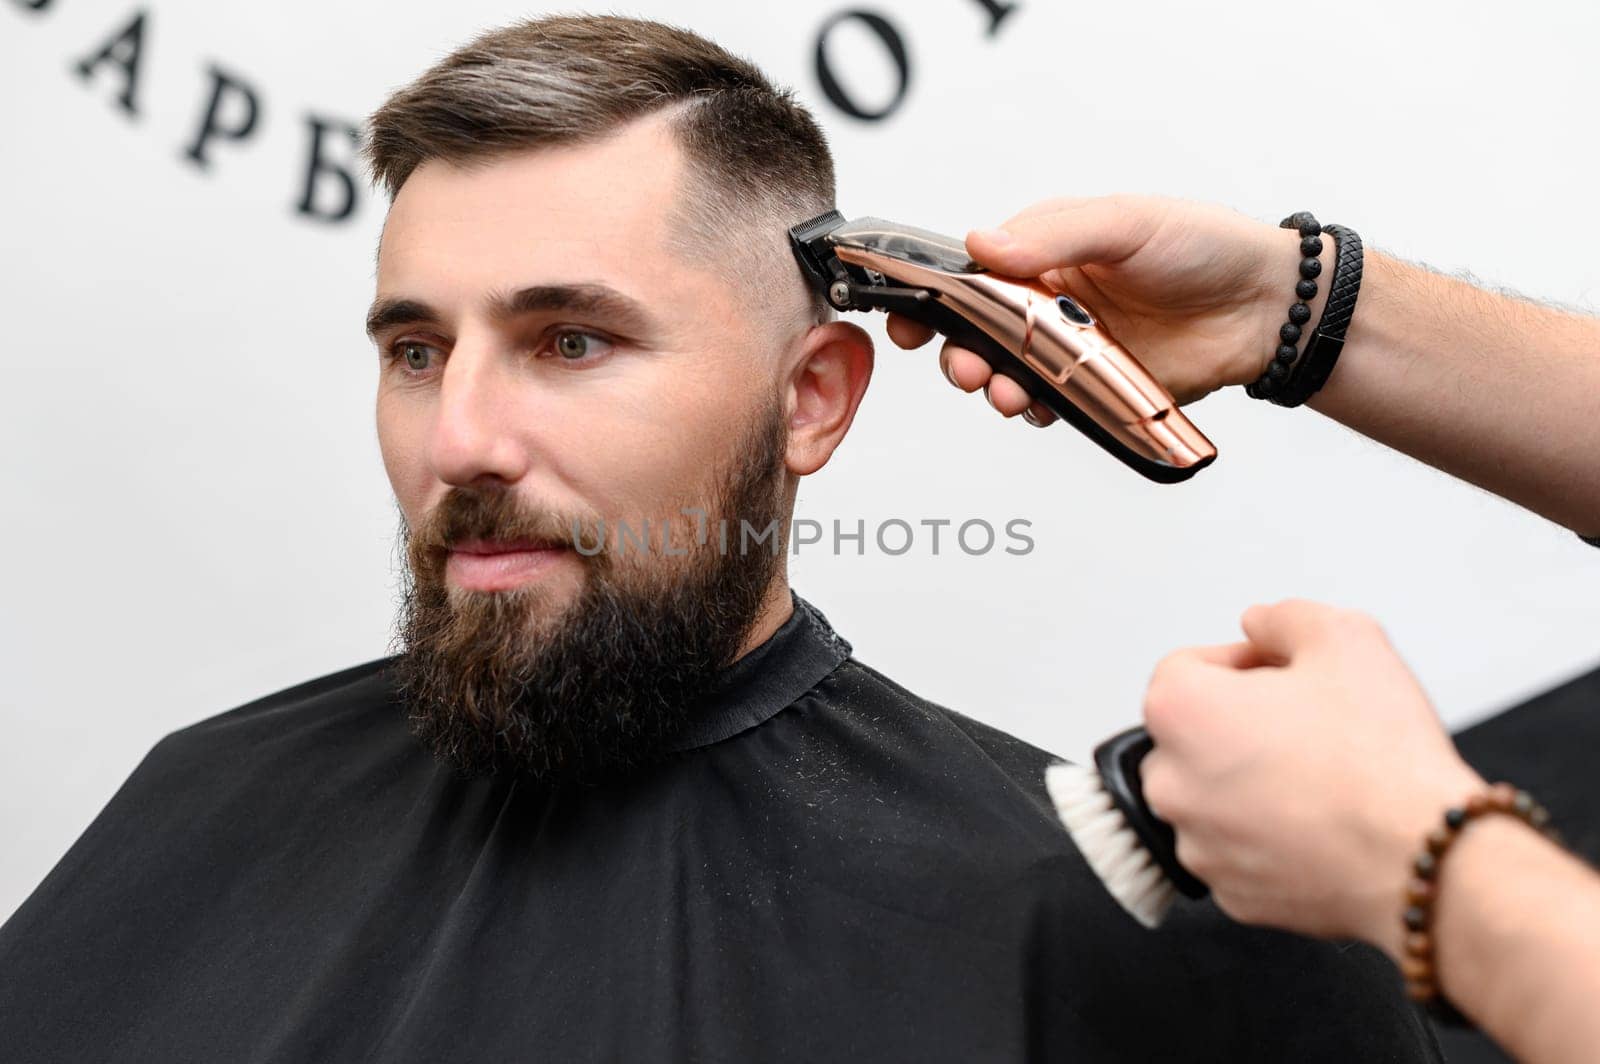 A barber cuts a man with a beard in a barber shop. Short haircut of the client with a clipper.